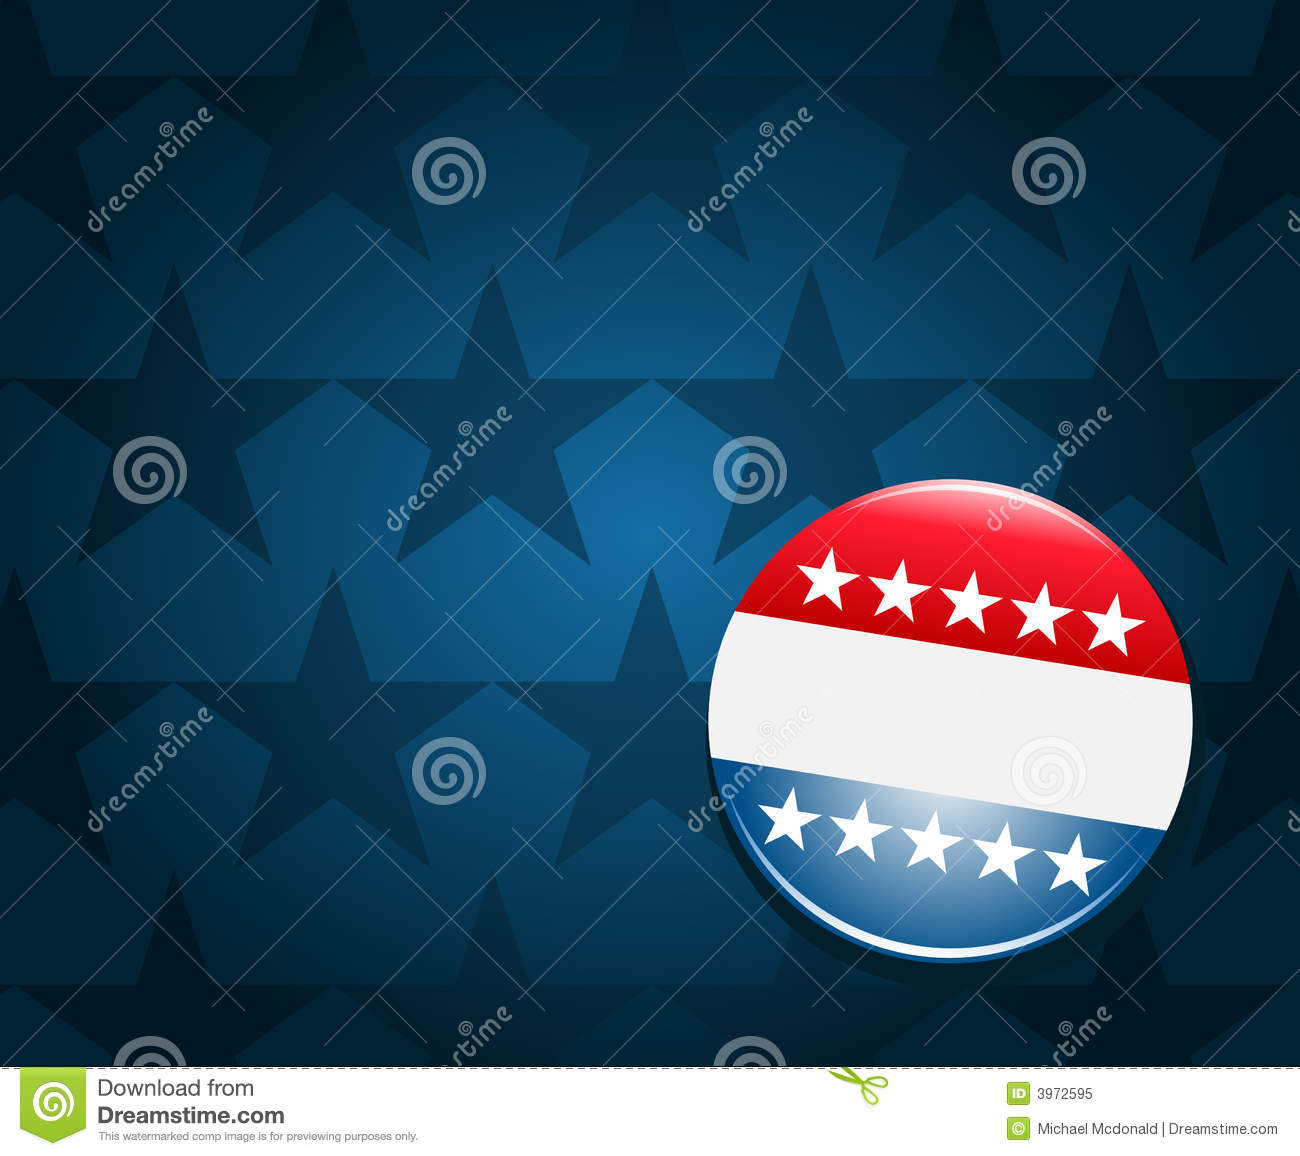 Election Campaign Button Background Royalty Free Stock Photo   Image